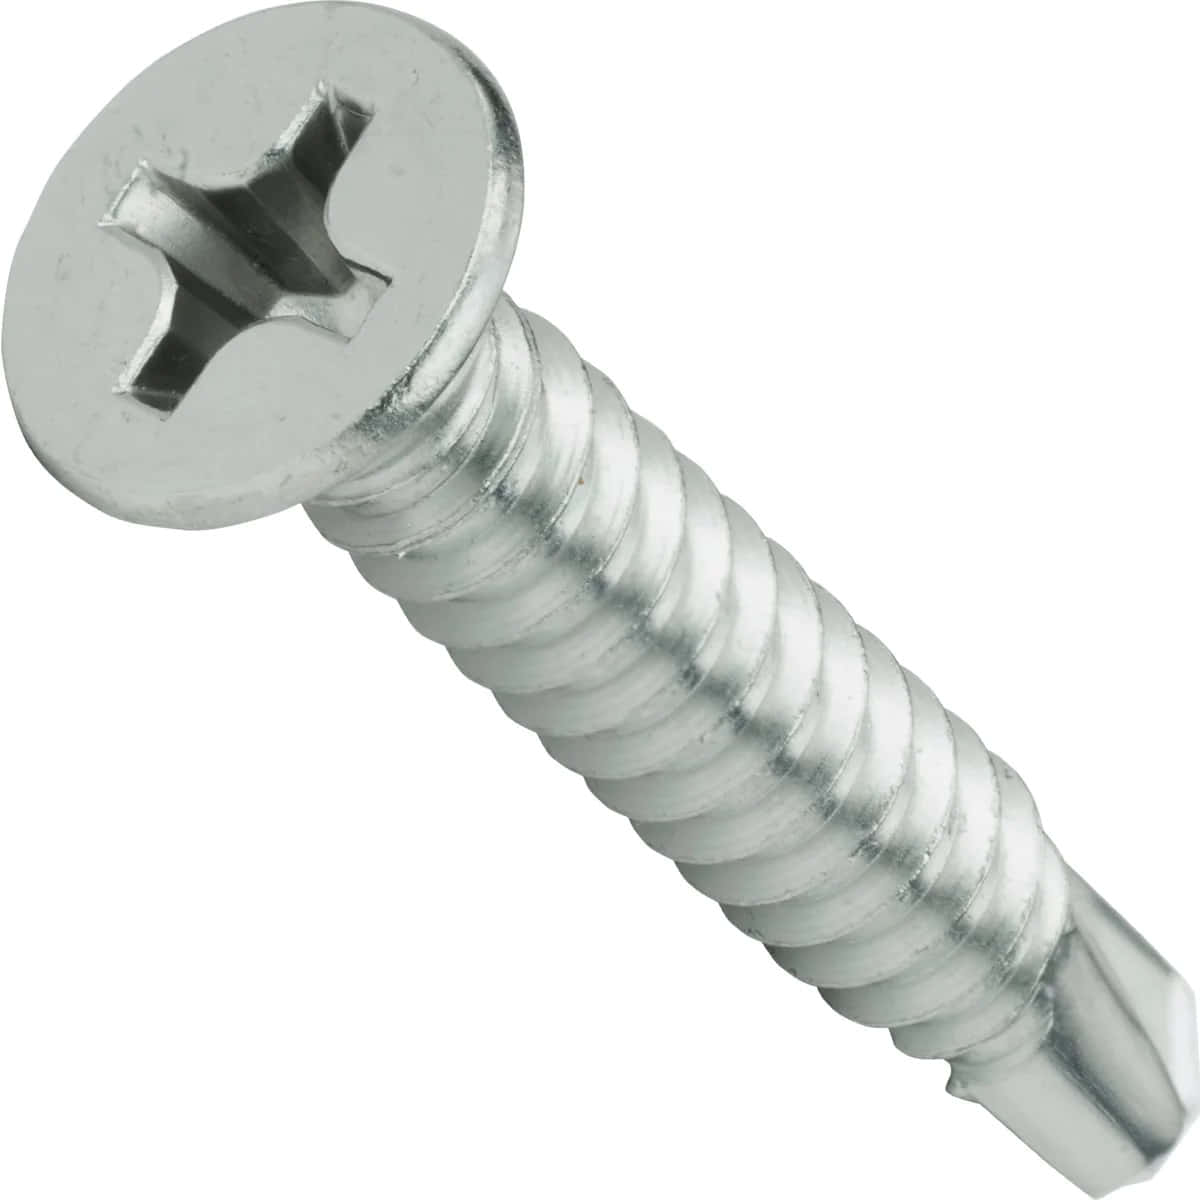 Screw Silver Metal Detail Picture